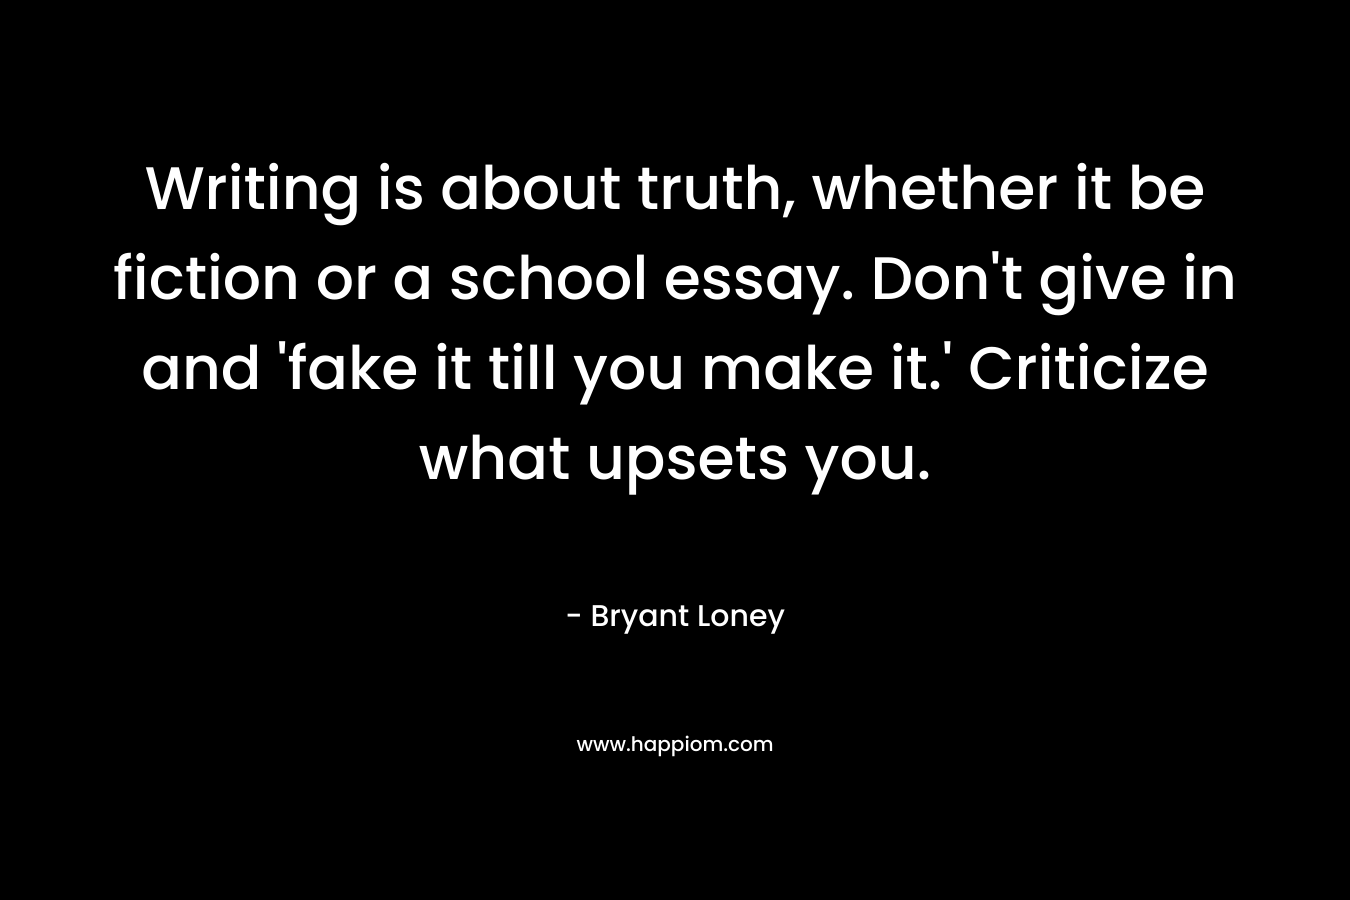 Writing is about truth, whether it be fiction or a school essay. Don't give in and 'fake it till you make it.' Criticize what upsets you.